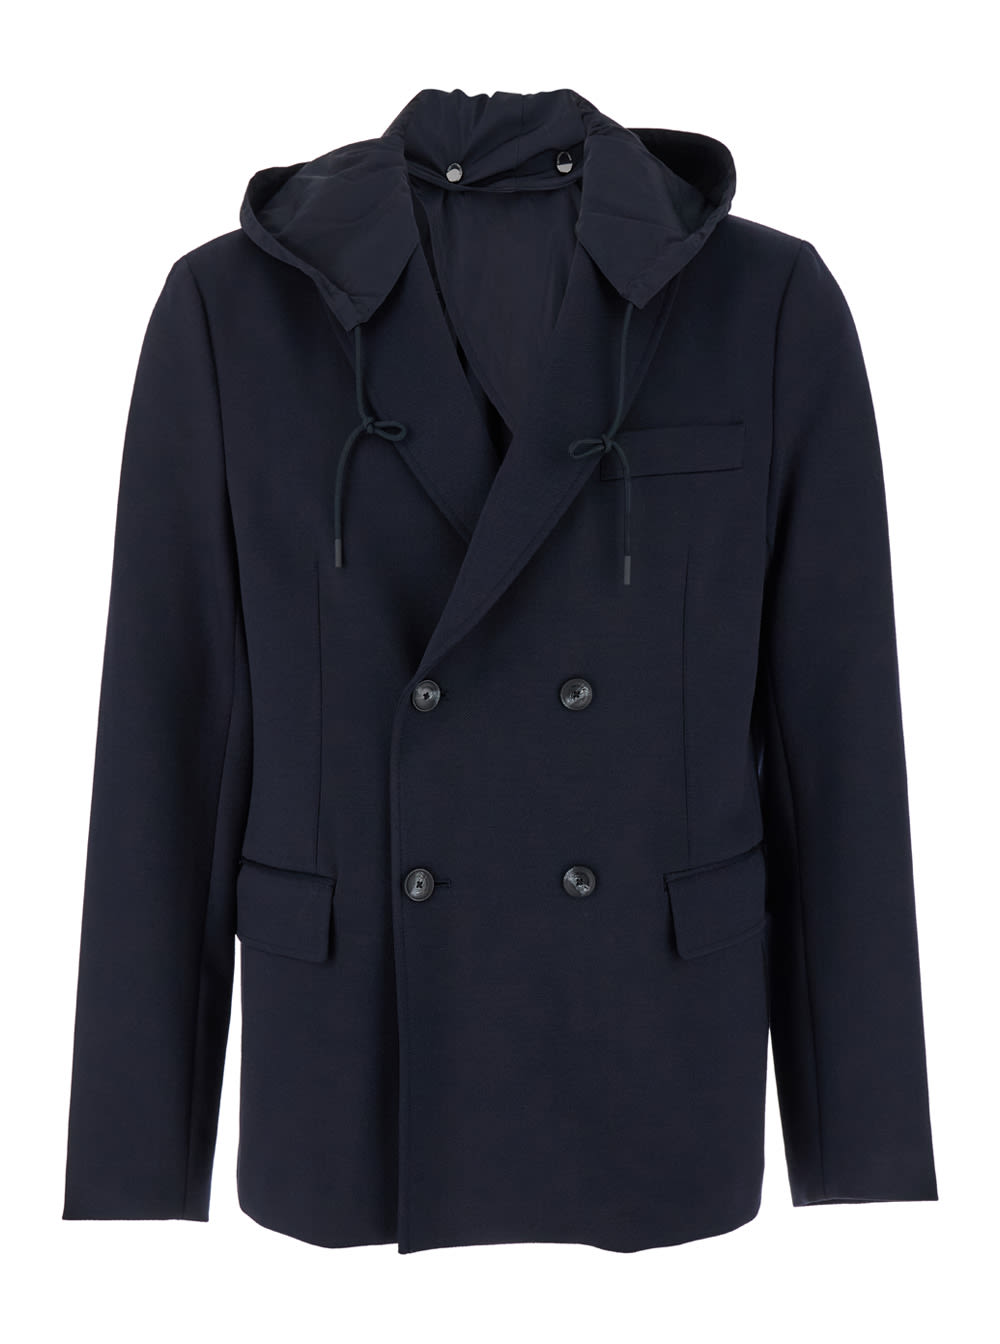 Blue Double-breasted Jacket With Detachable Hood In Wool Blend Man